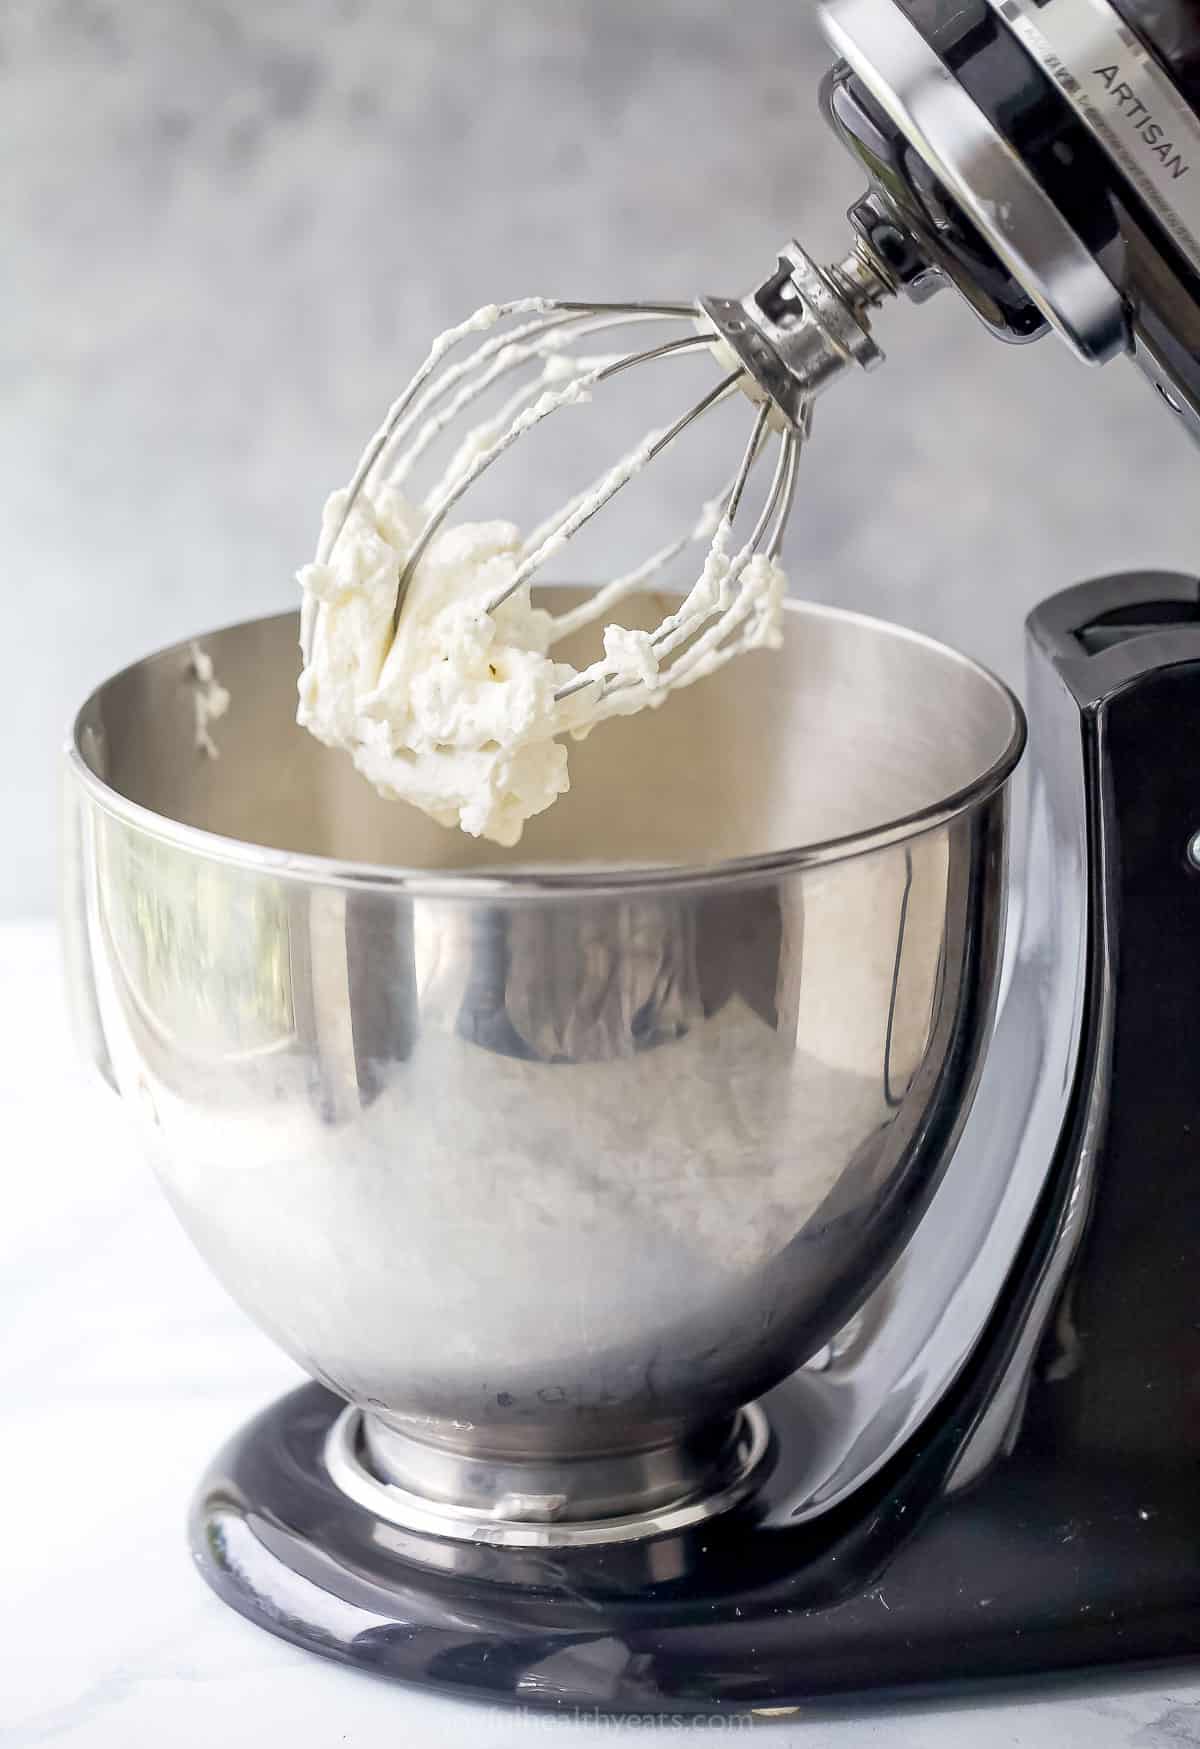 An electric mixer fitted with a large metal bowl and a whisk attachment with whipped cream being beaten